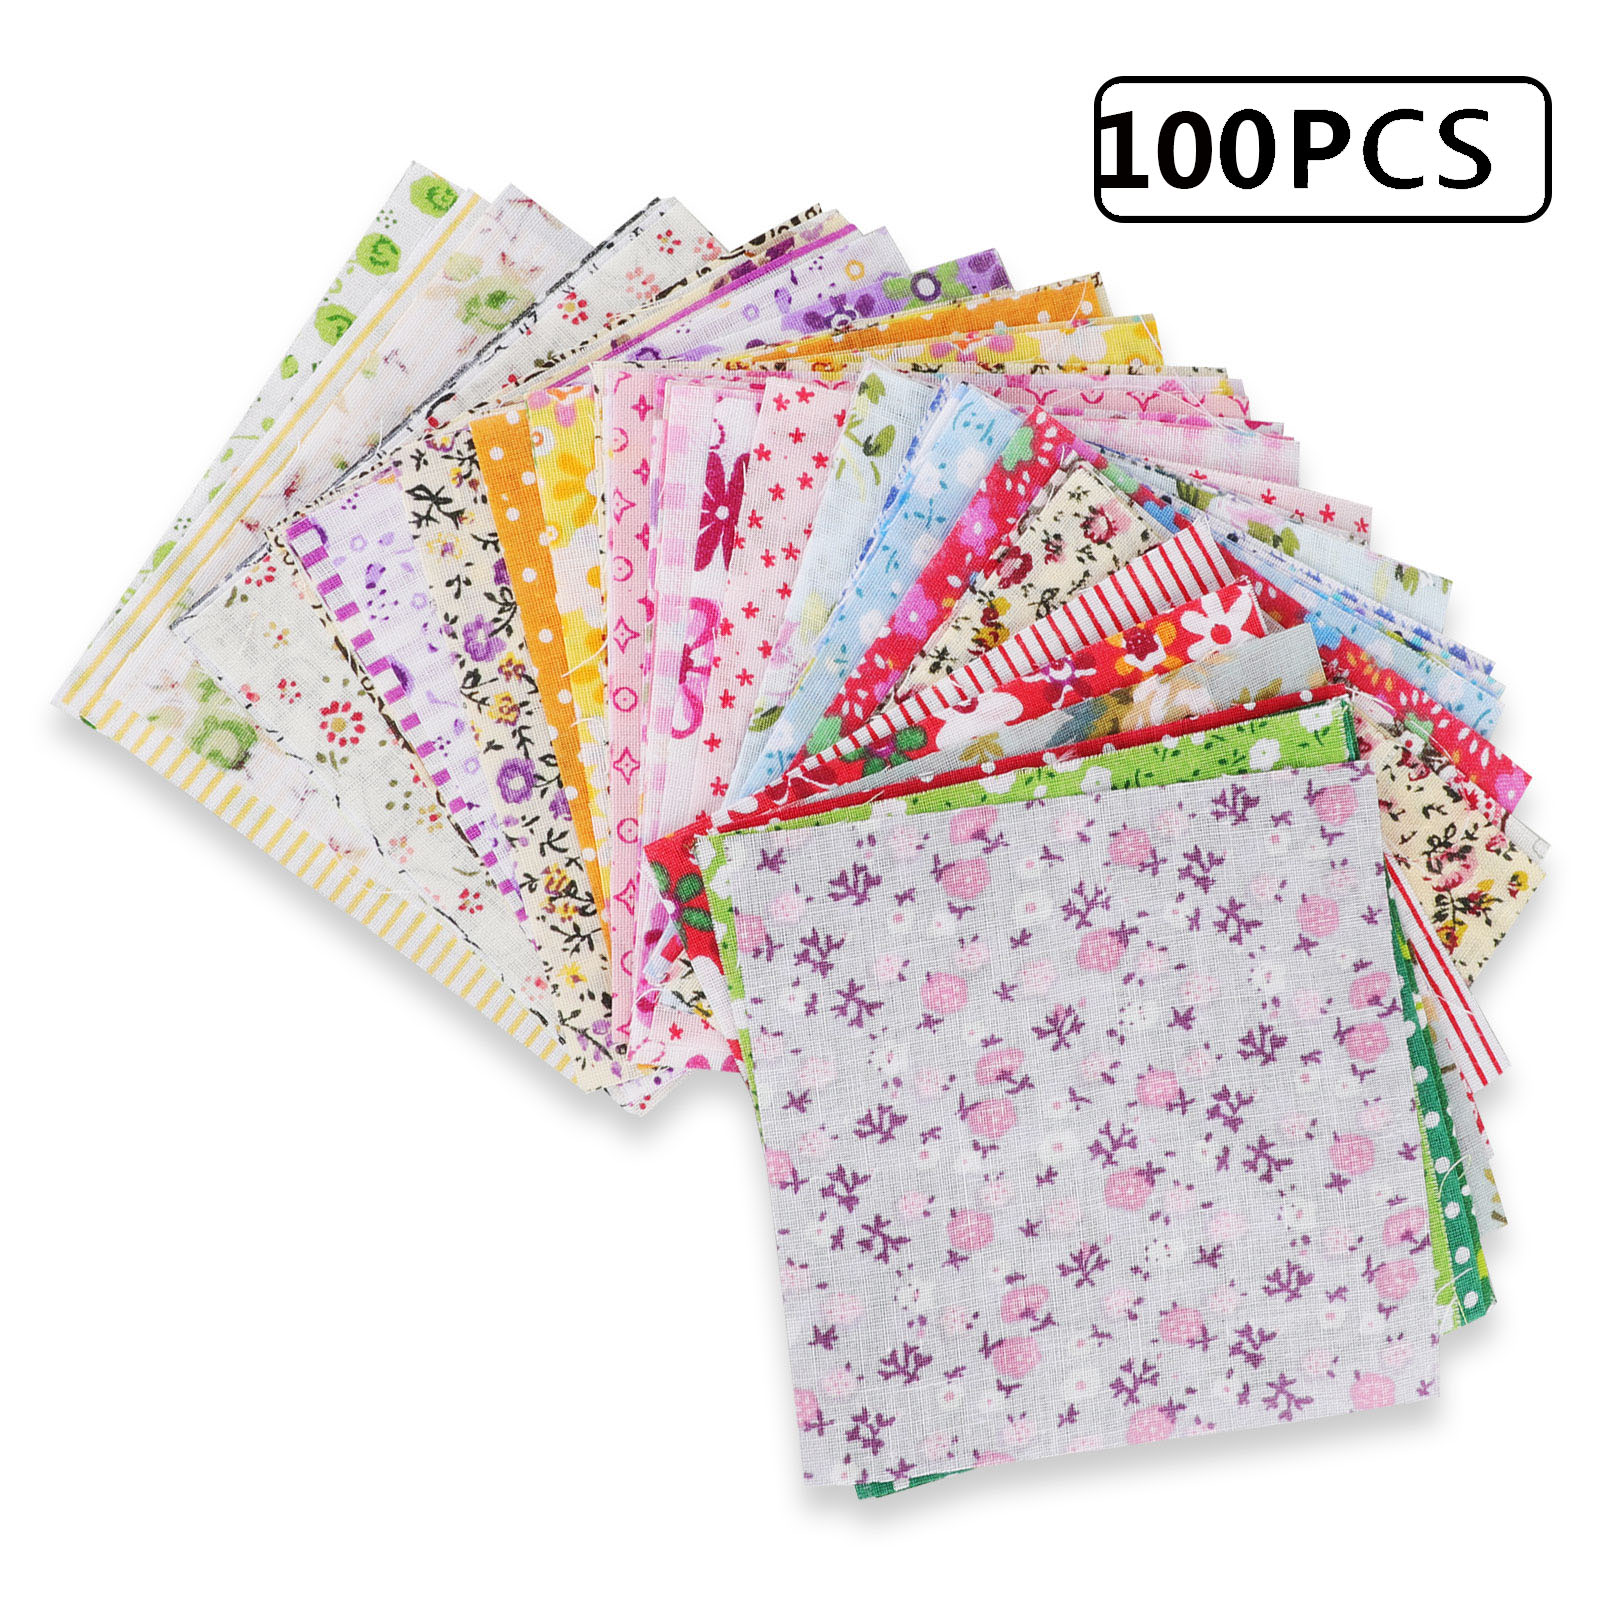 100pcs Cotton Fabric Patchwork, TSV 4*4in Cotton Craft Fabric Bundle Squares  Sheet Cloth, DIY Sewing Scrapbooking Quilting Pattern Artcraft, Different  Patterns for Decorations 